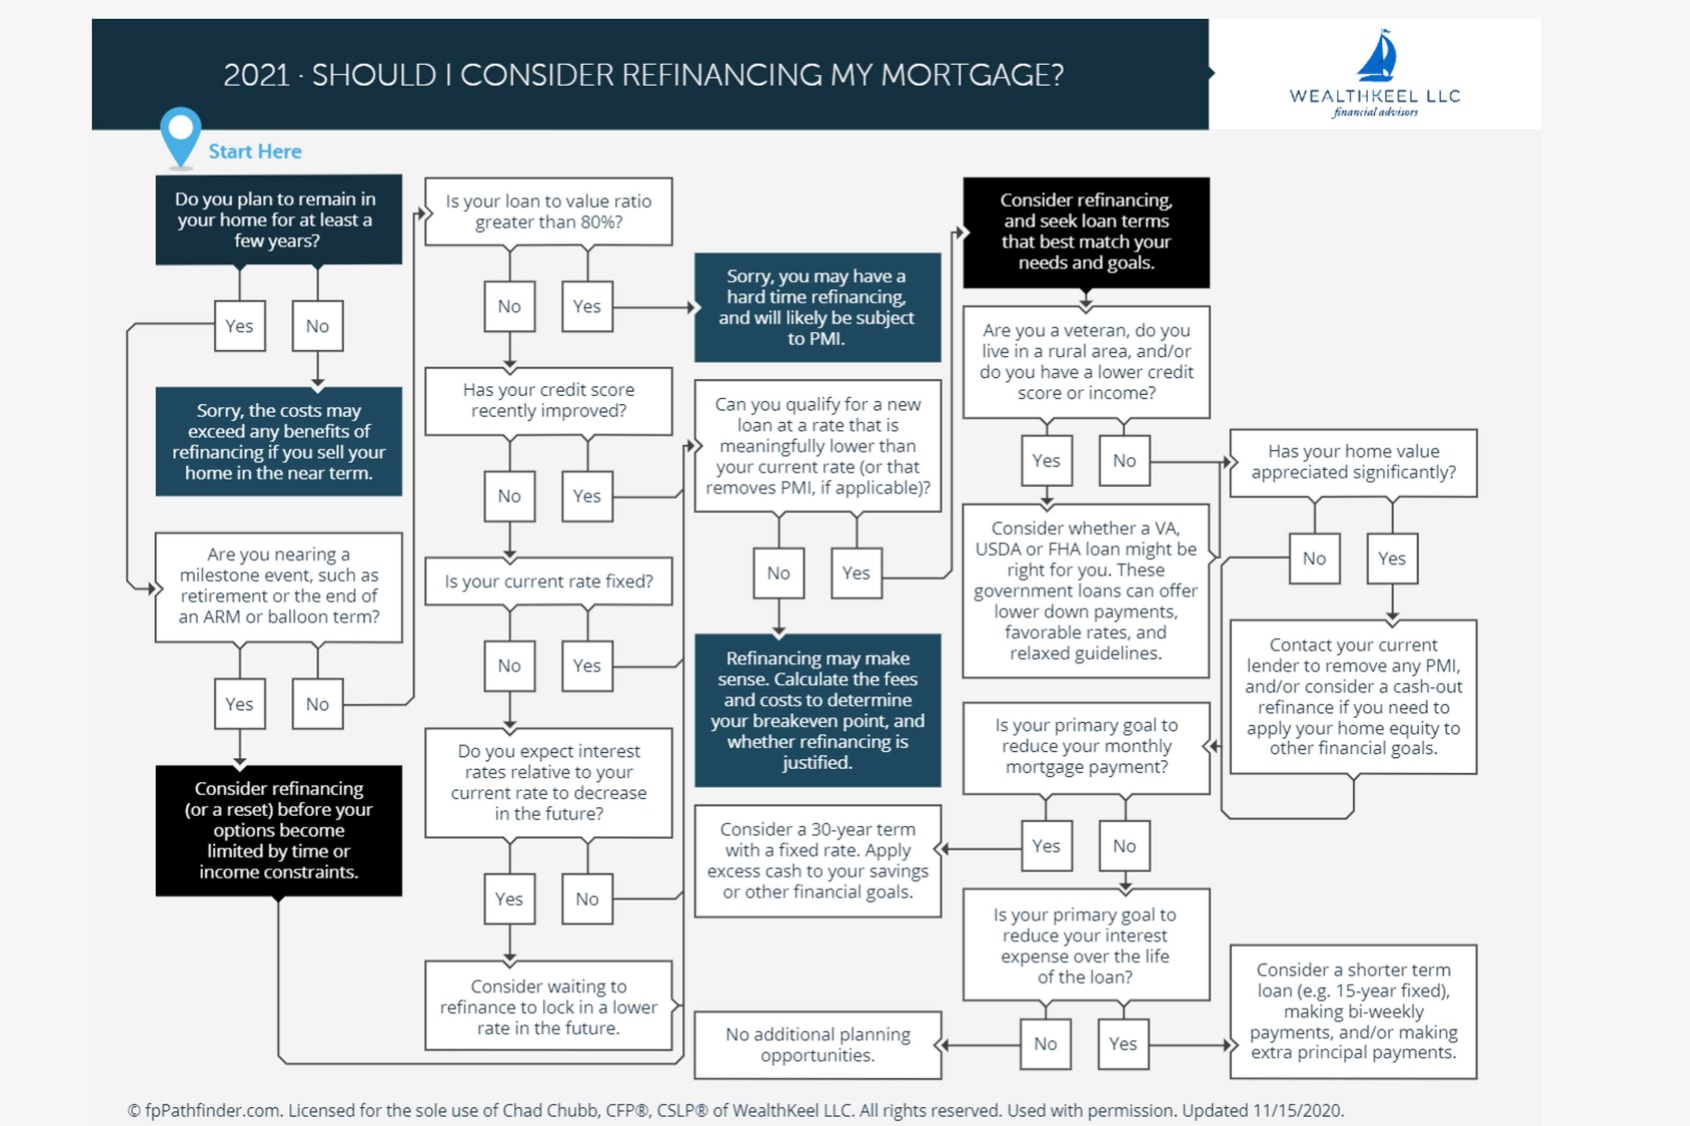 A flow chart outlines the options when considering whether to refinance your mortgage.